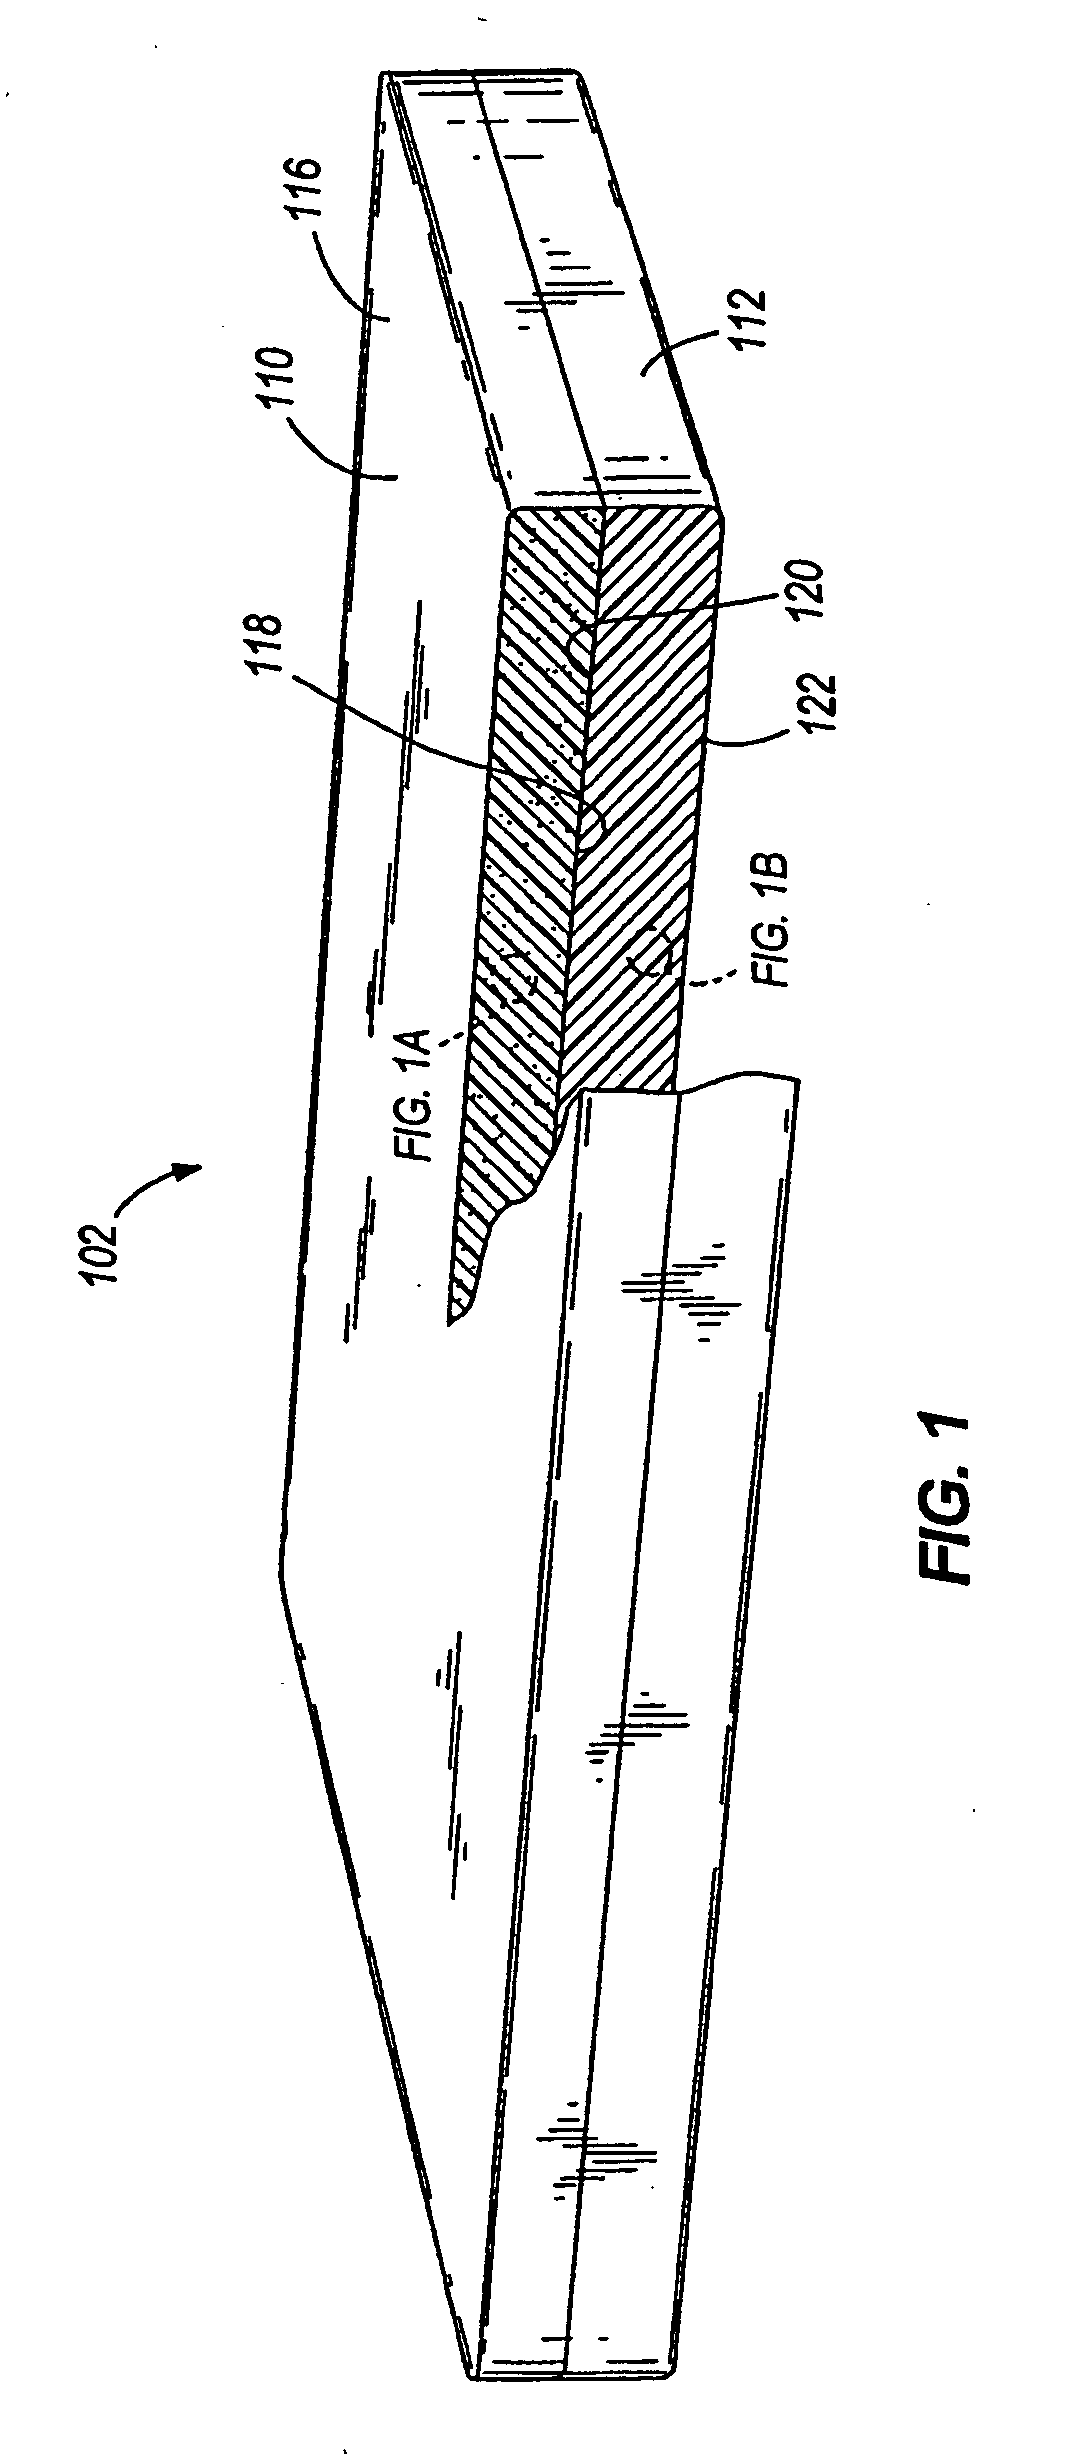 Reticulated material body support and method